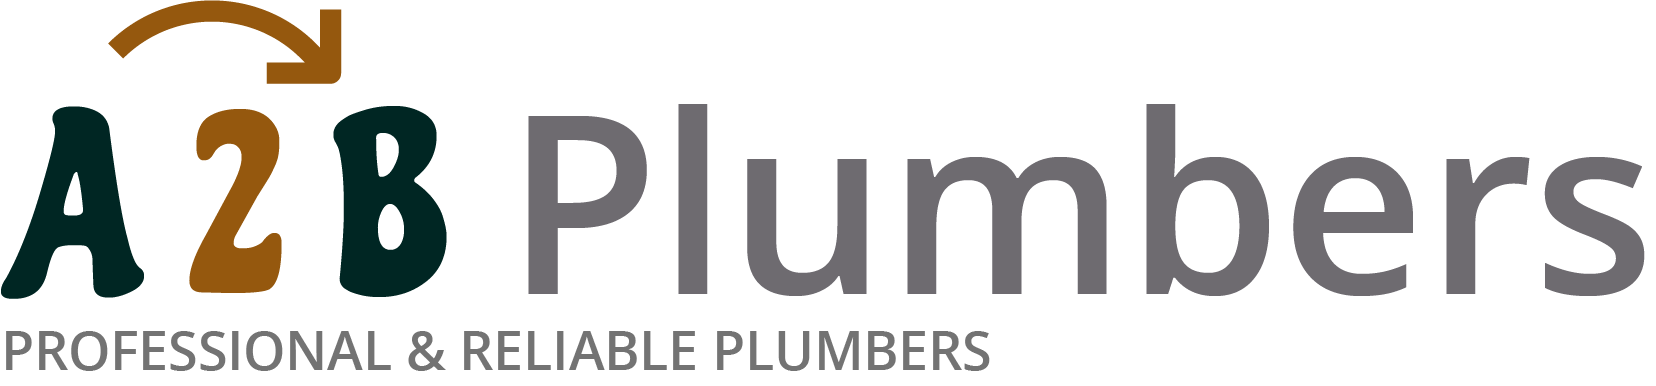 If you need a boiler installed, a radiator repaired or a leaking tap fixed, call us now - we provide services for properties in Whittlesey and the local area.